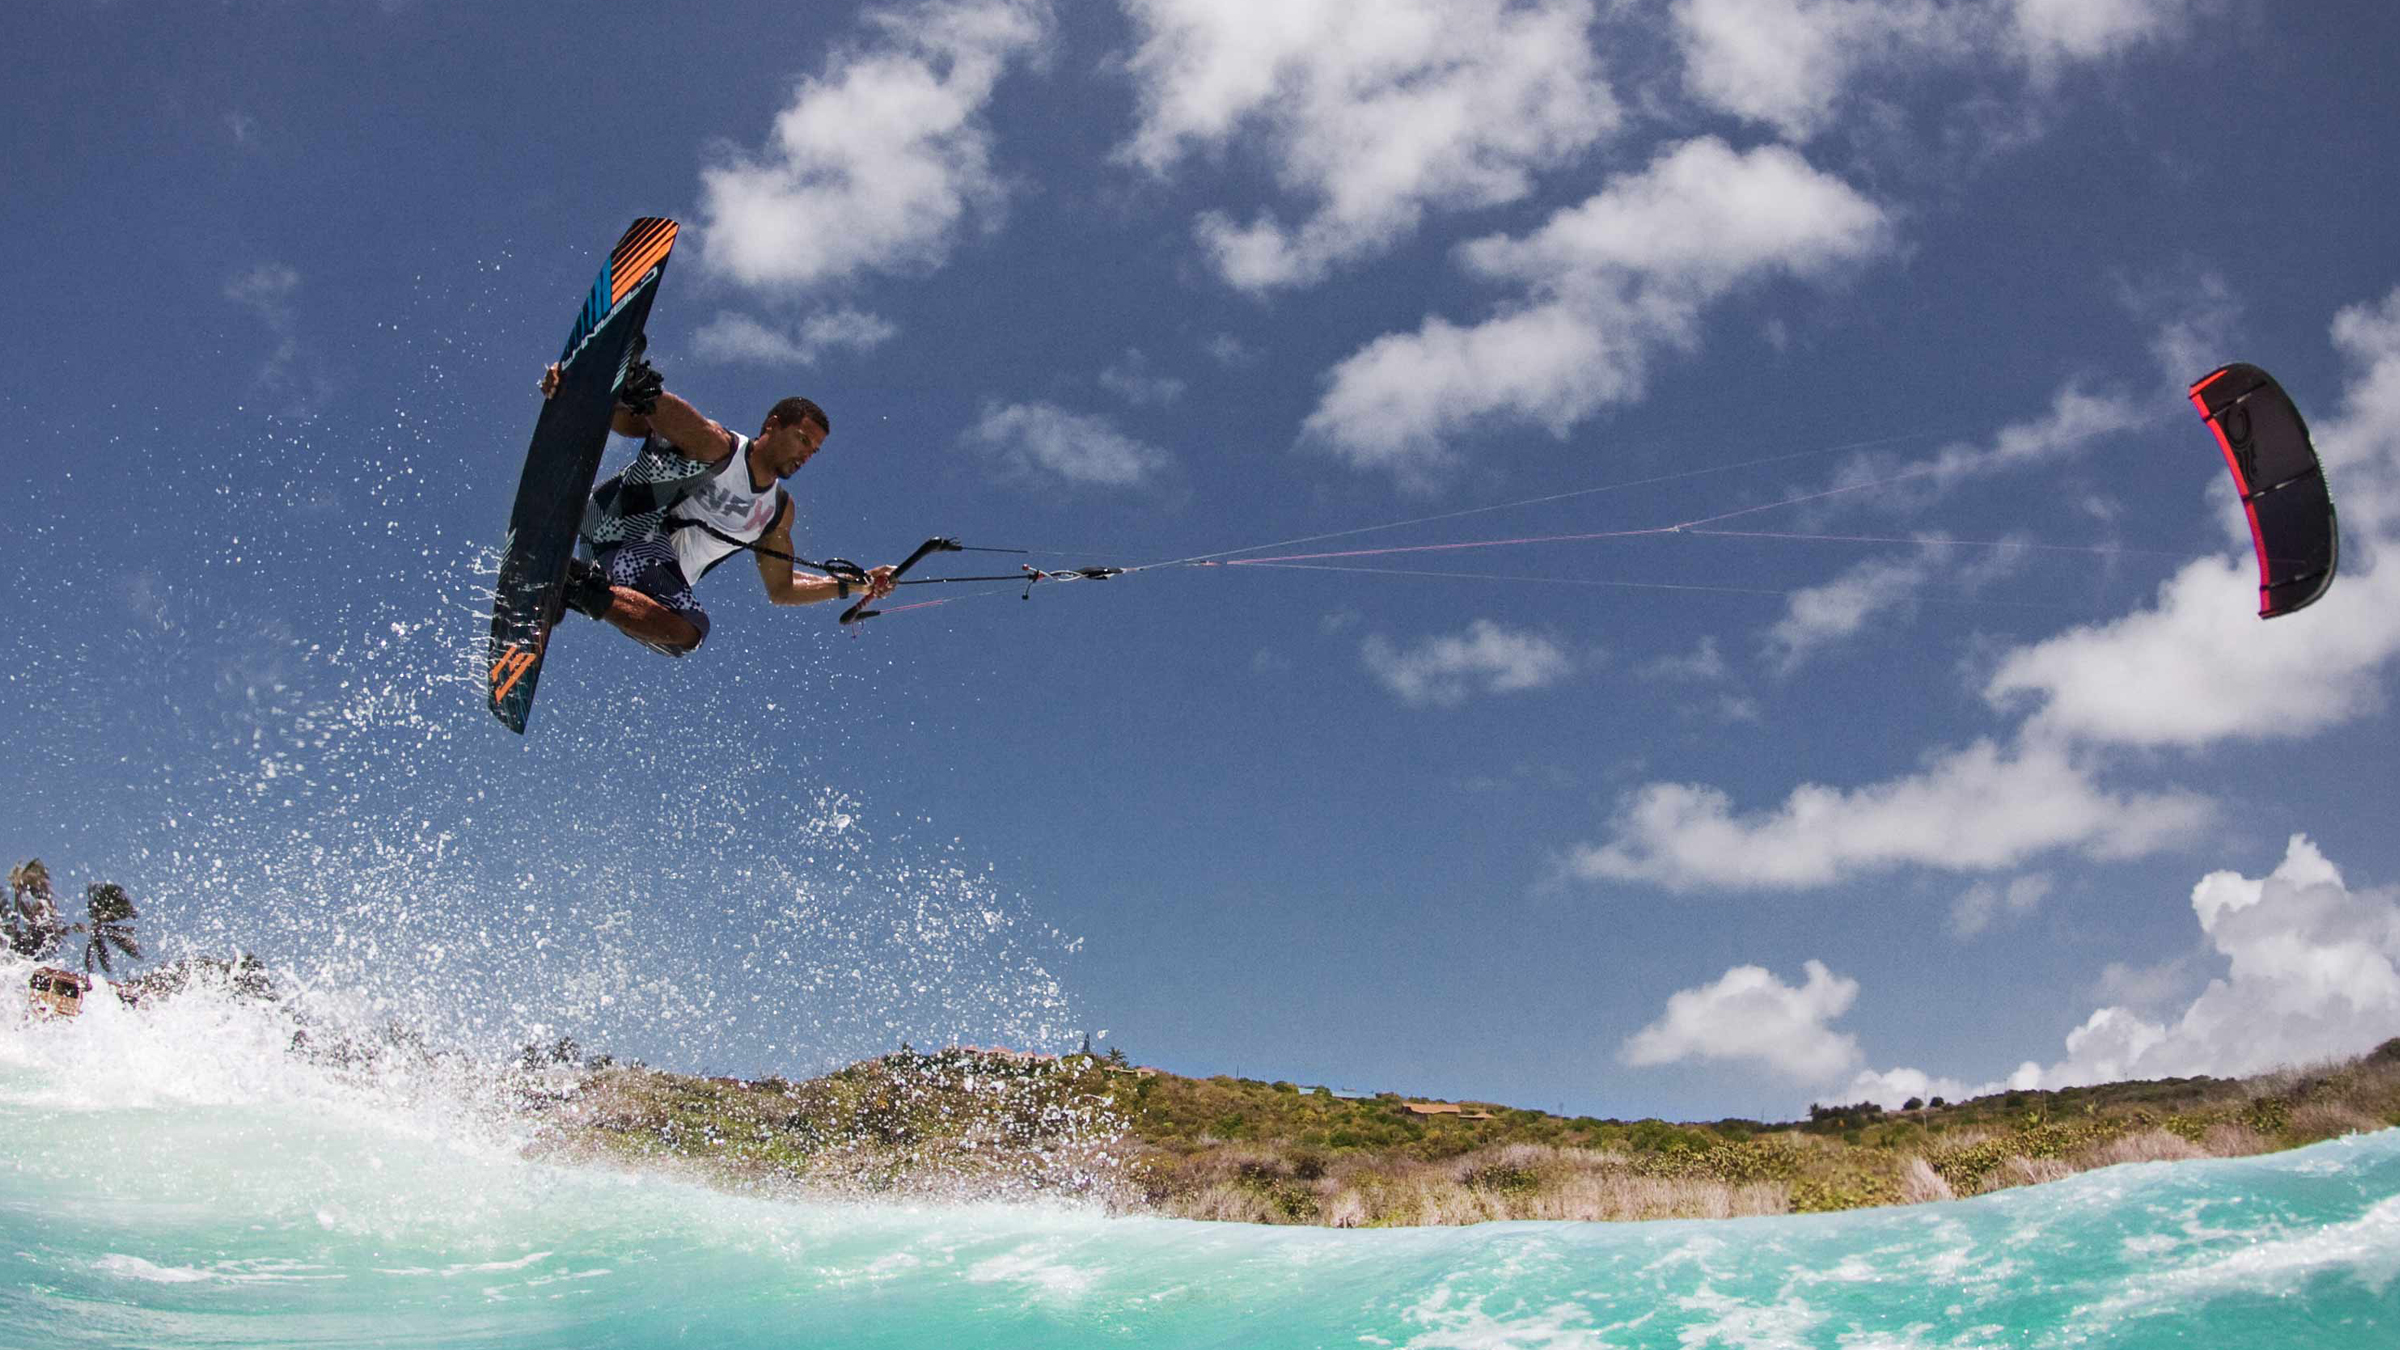 kitesurf wallpaper image - Andre Phillip with a nice grab over the surf - in resolution: High Definition - HD 16:9 2400 X 1350